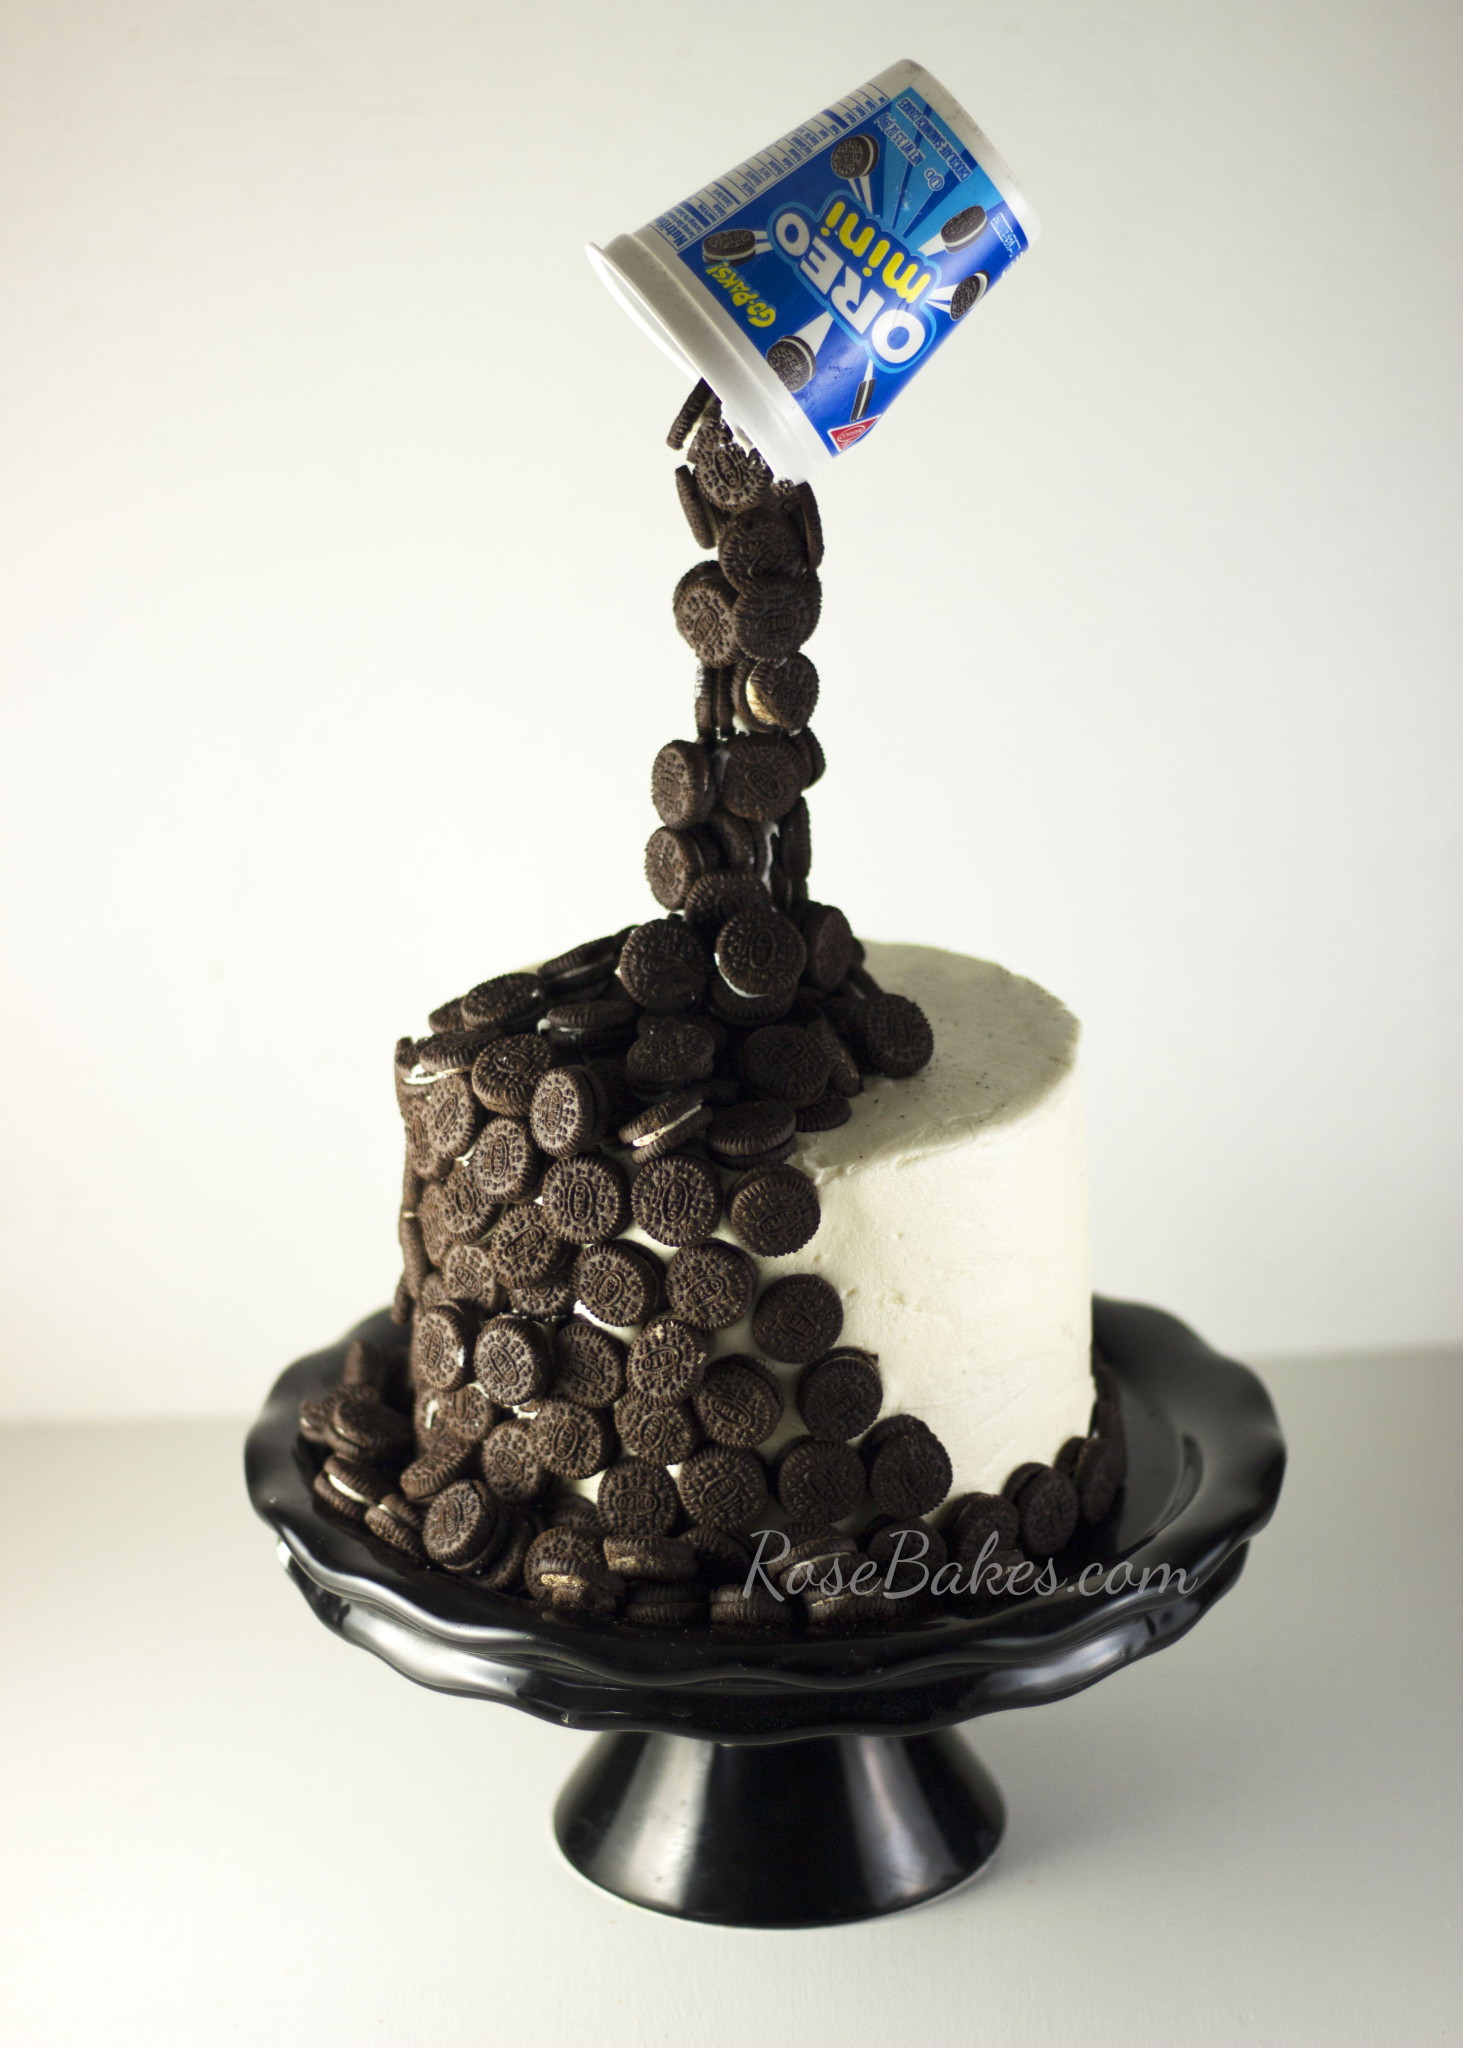 CakeFrame Pouring Kit: How To Make a Gravity Defying Cake | Gravity defying  cake, Anti gravity cake, Gravity cake